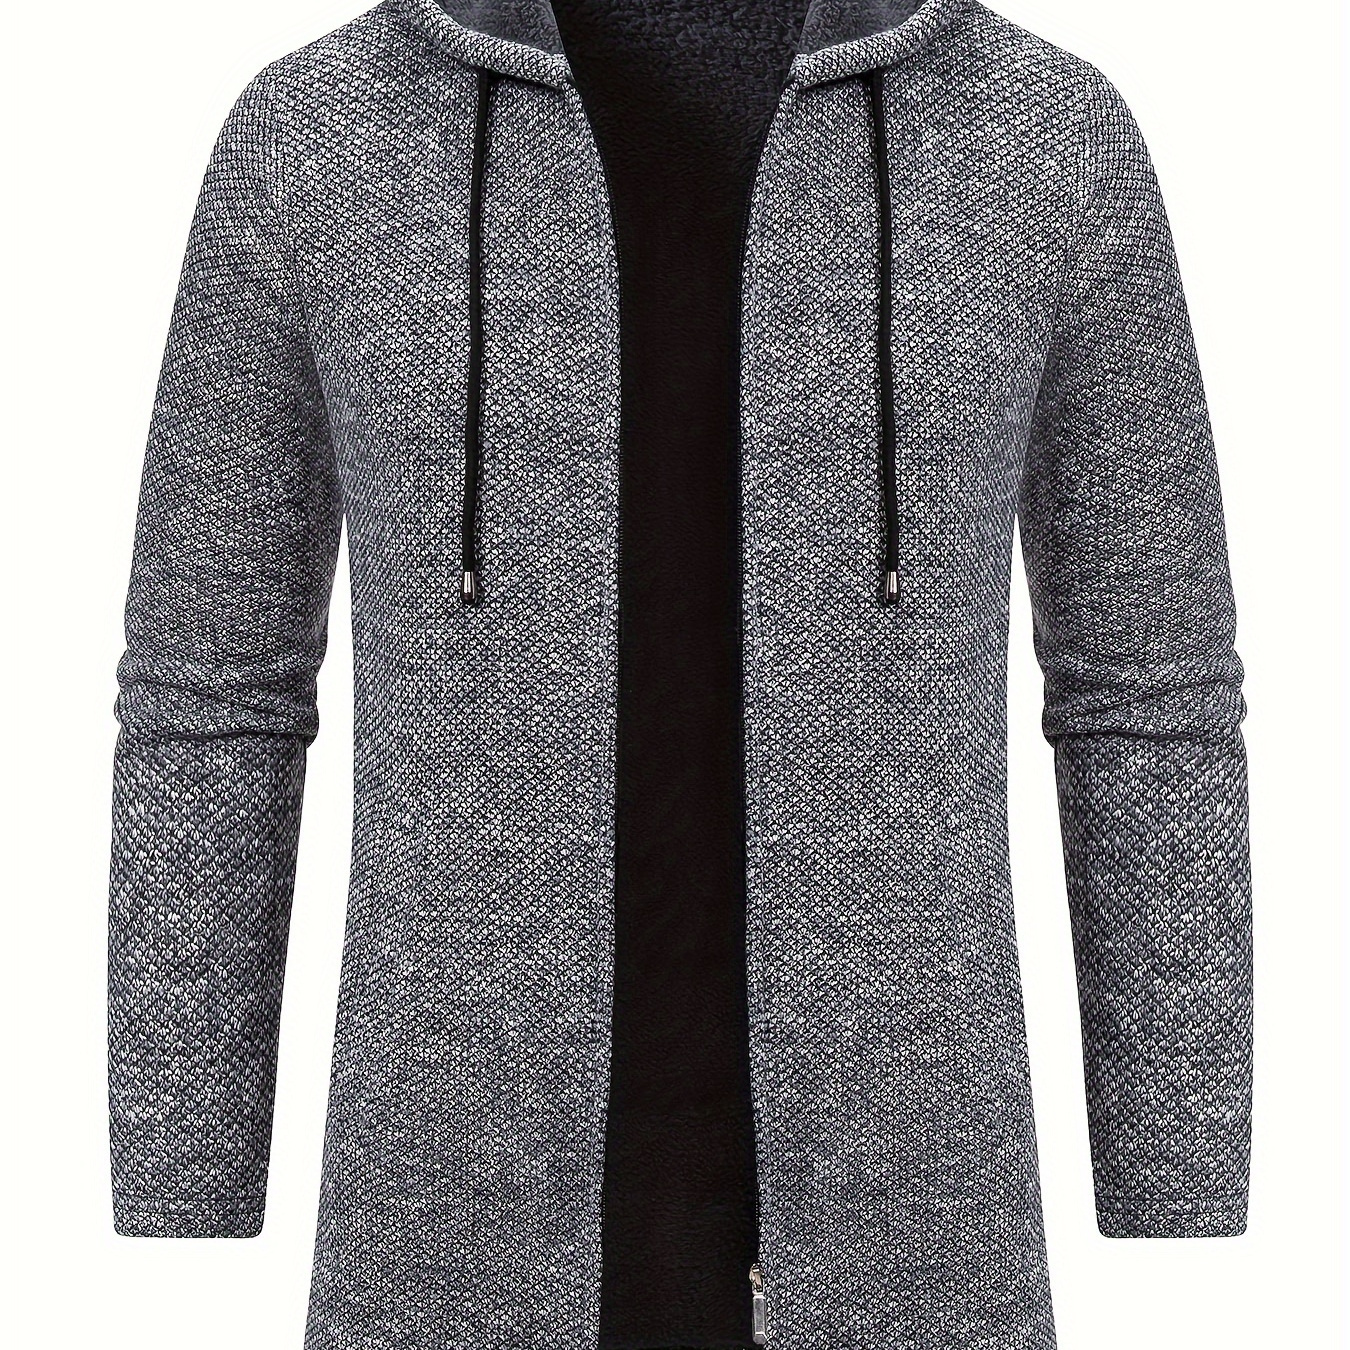 

Men's Casual Mid-length Hooded Knitted Cadigan Jacket, Chic Warm Coat For Fall Winter